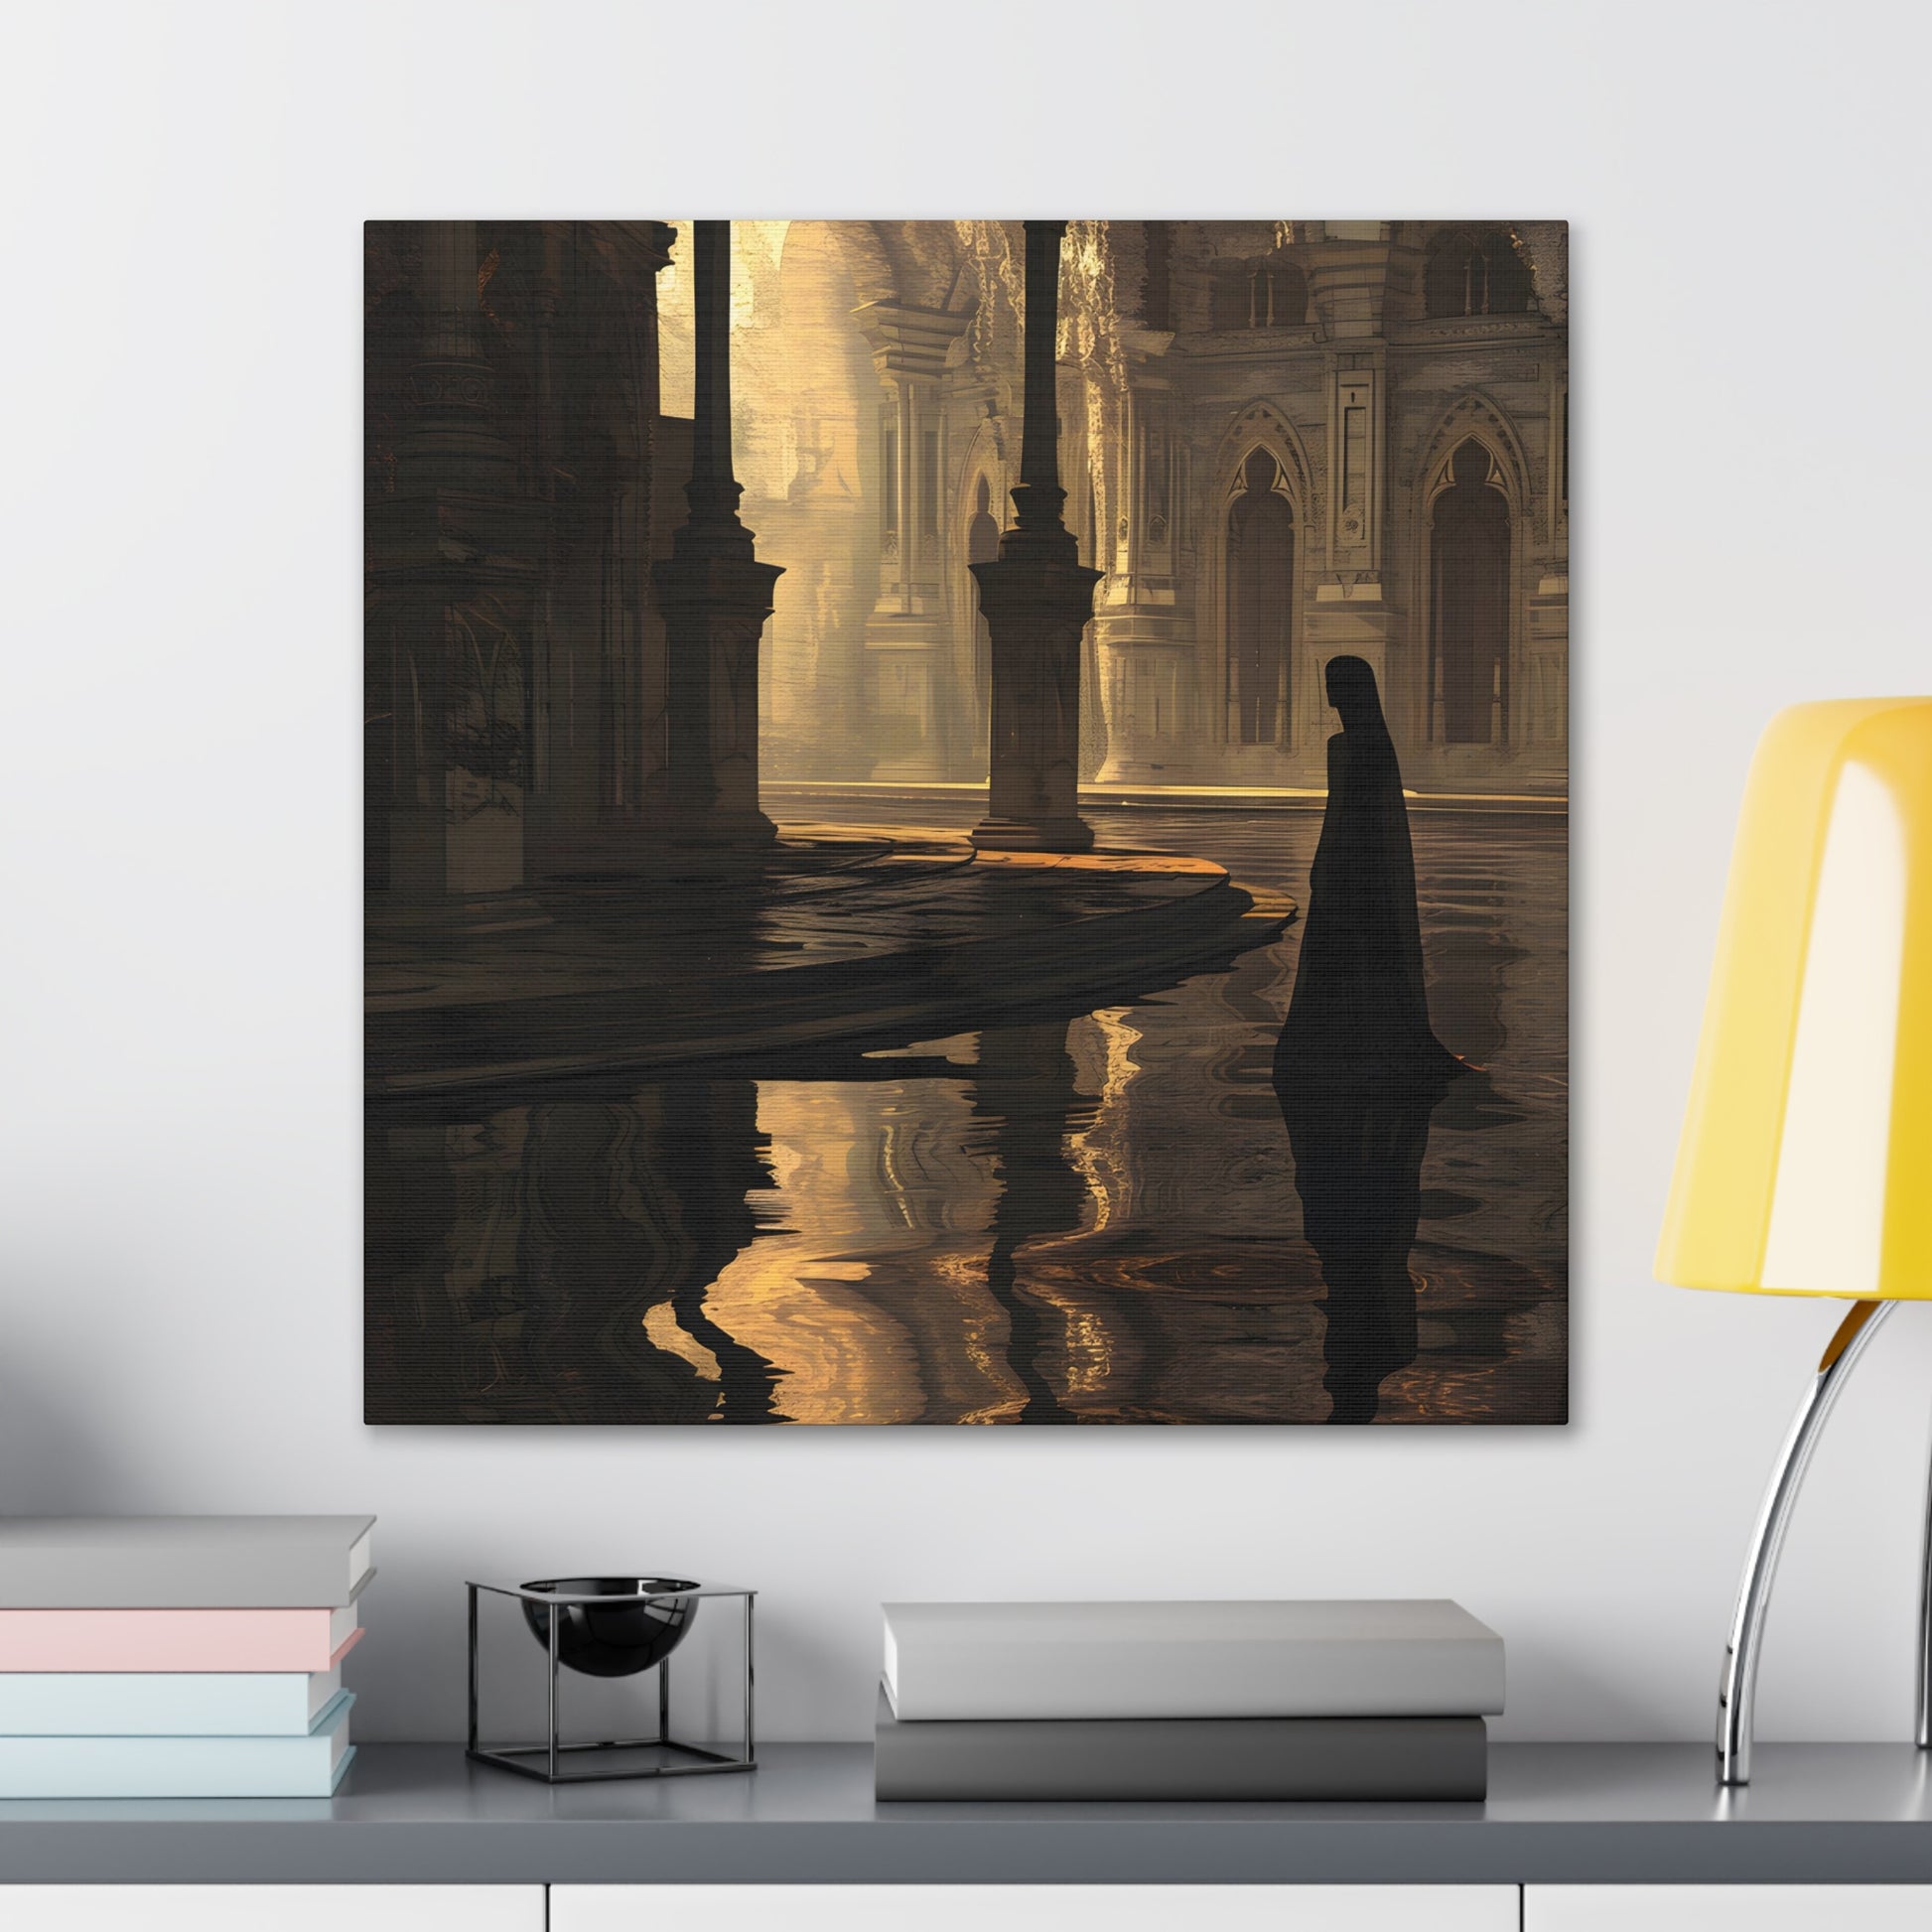 in situ desk Avery Pennington's artwork of a golden-lit, flooded cathedral with a solitary figure in black, blending Gothic architecture with reflections in water, evoking solitude and introspection